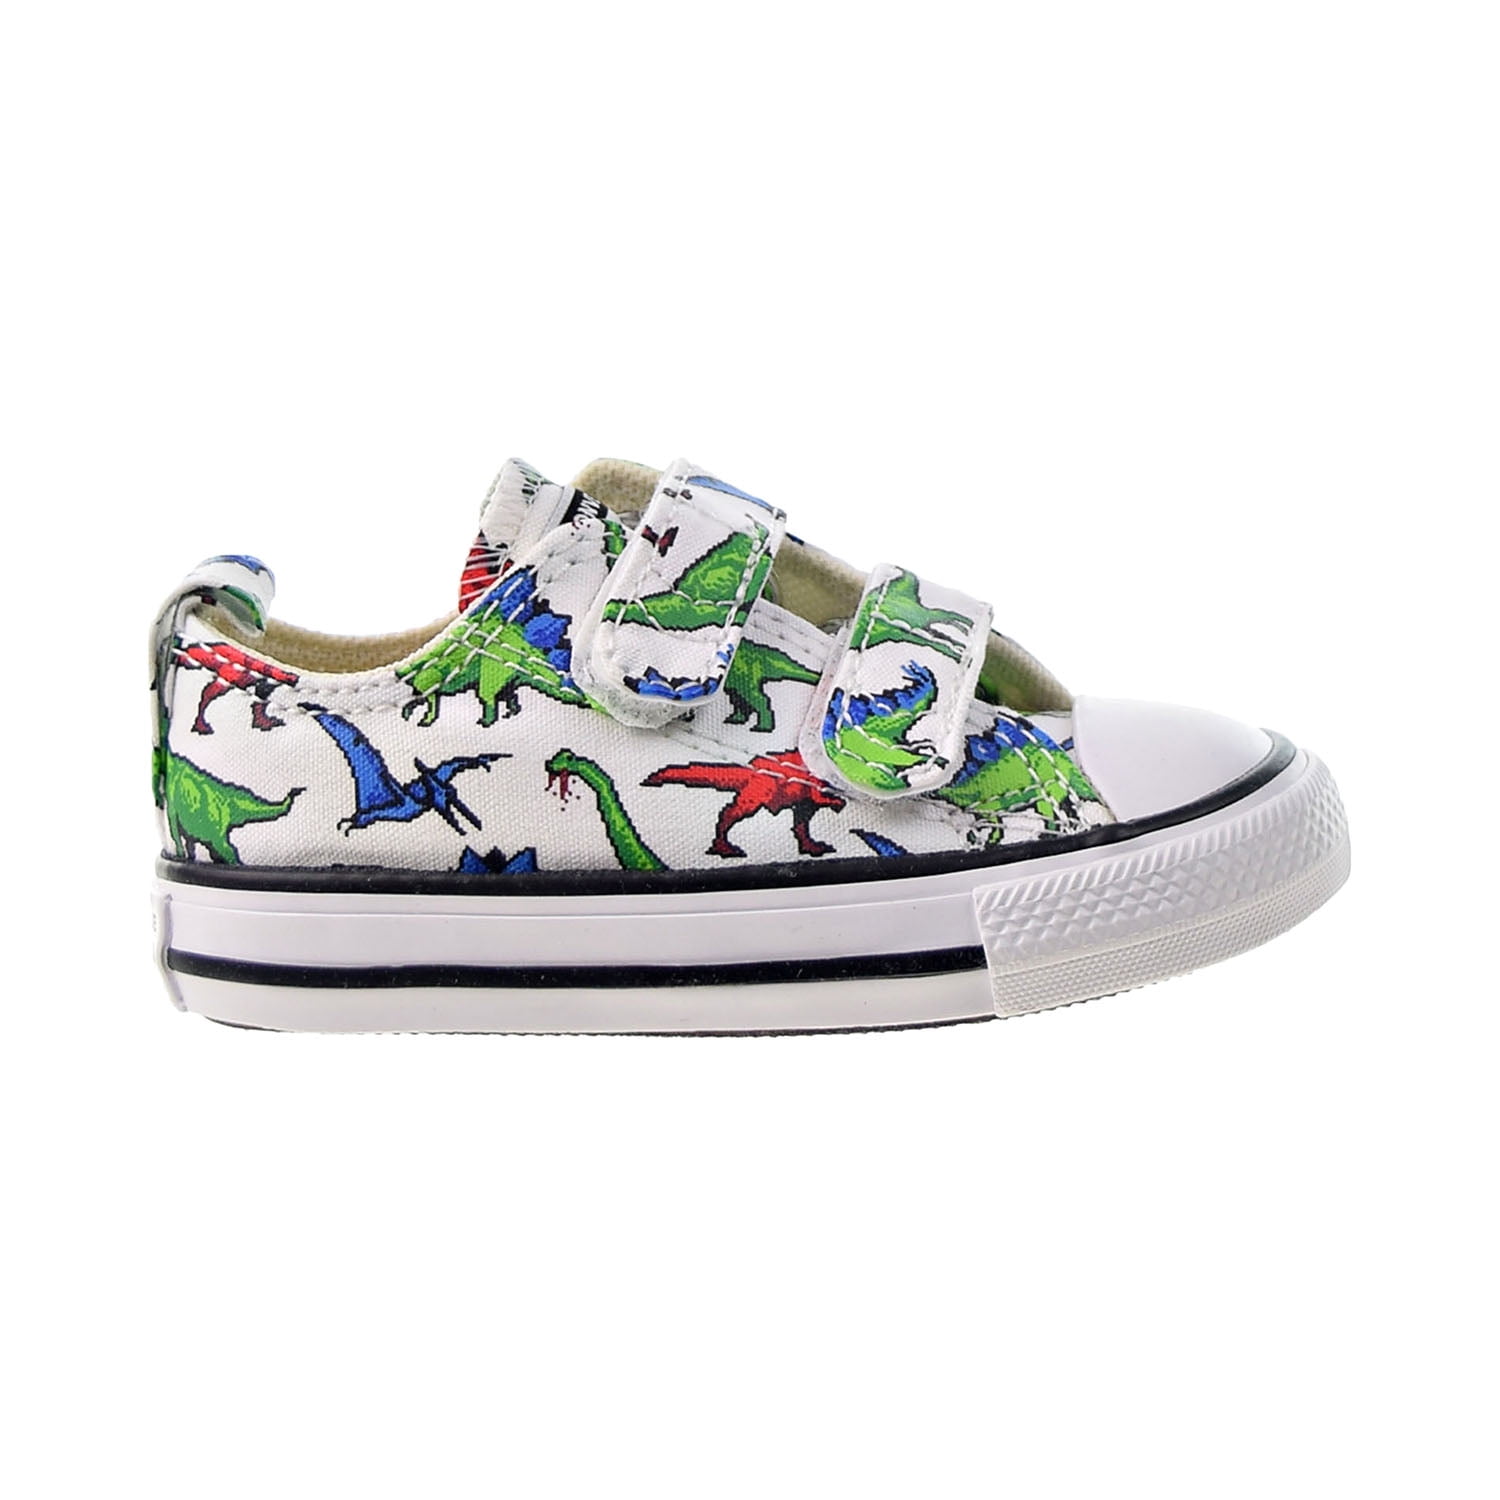 Per kraai koppeling Converse Chuck Taylor All Star 2V Strap Ox Toddlers' Shoes White-Green-Red  770166f - Walmart.com